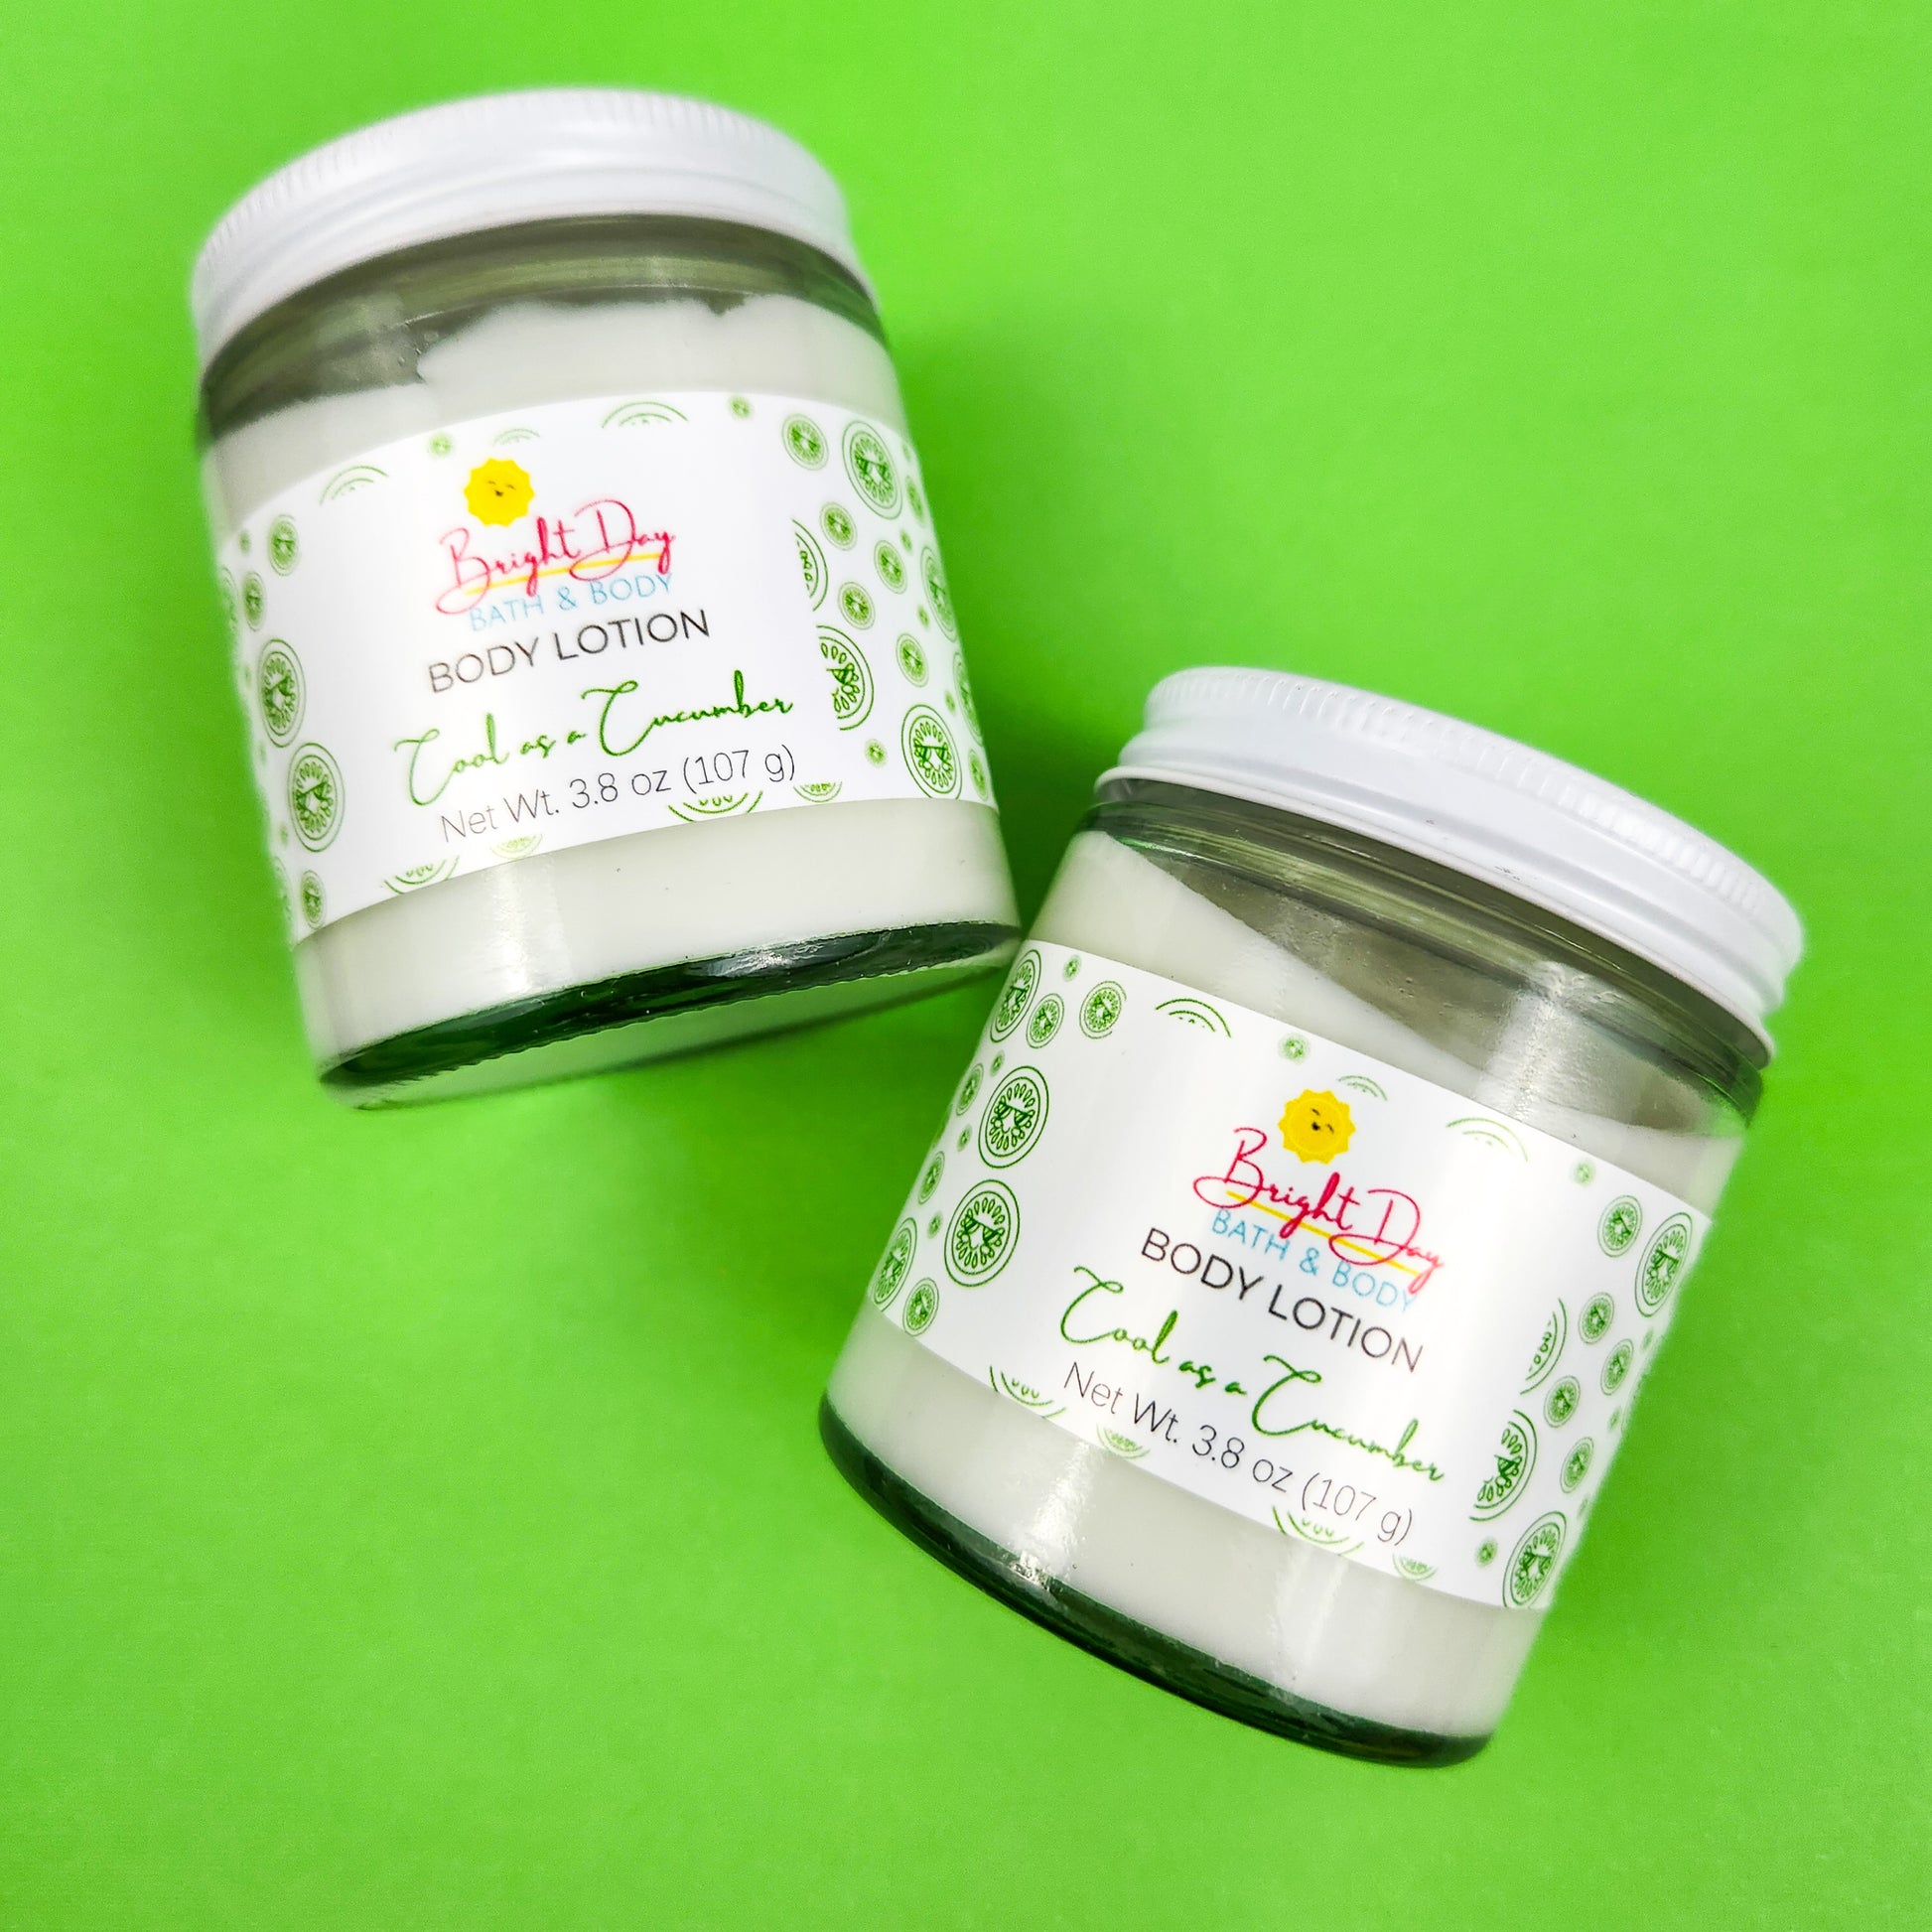 Two jars of Cool as a Cucumber Body Lotion on a green background.